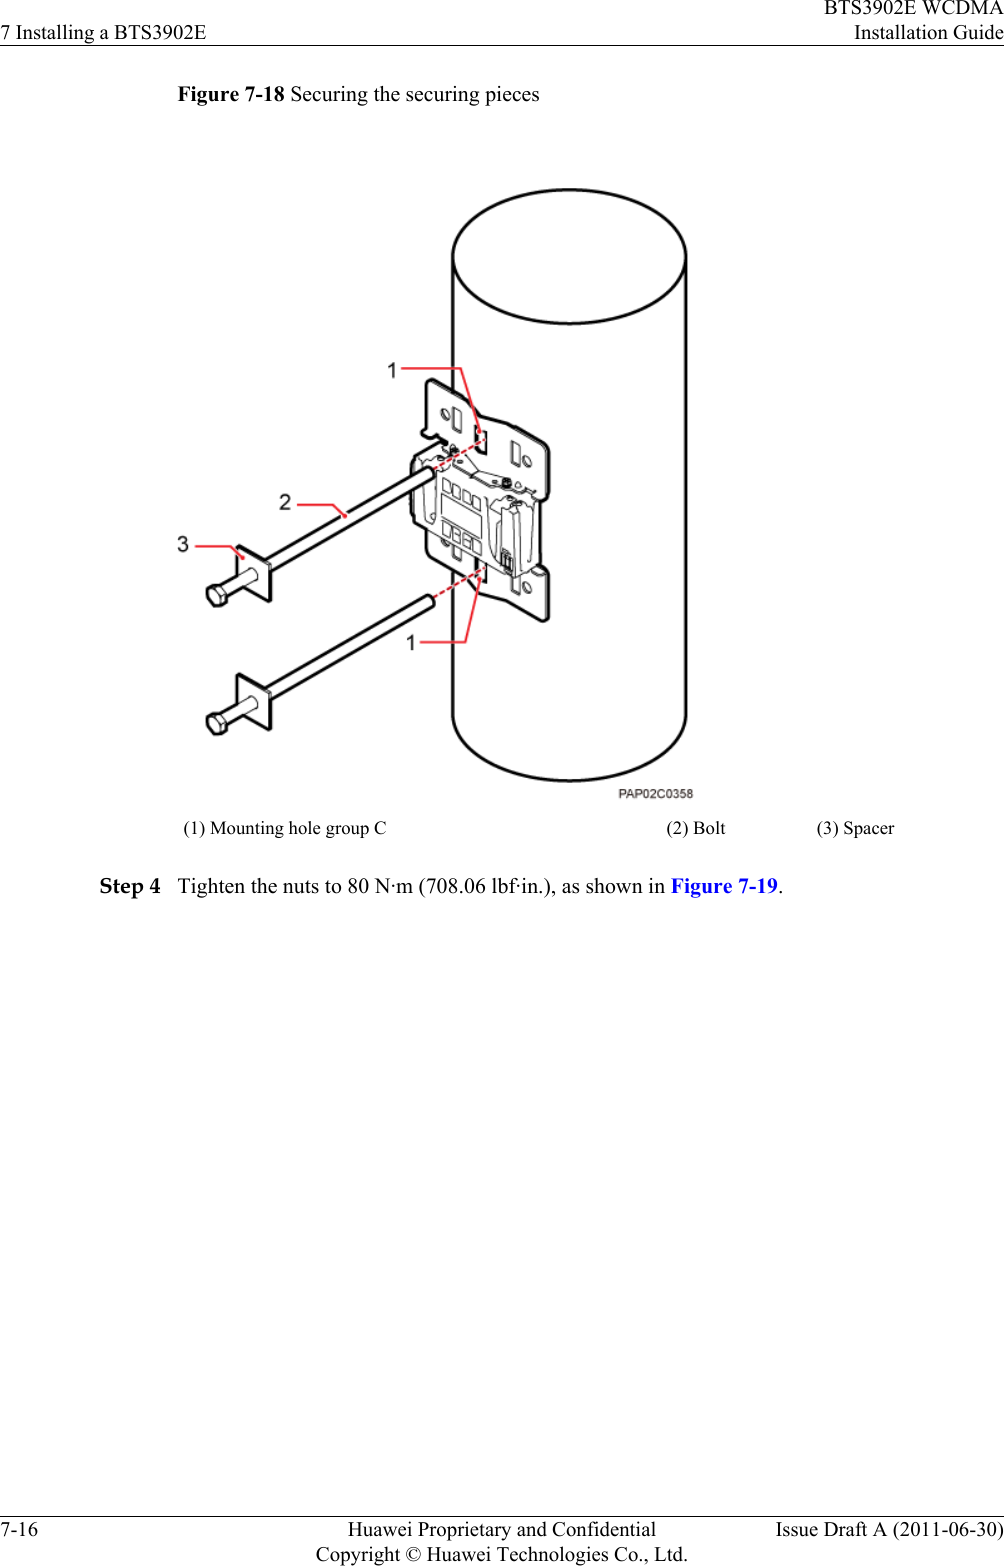 Figure 7-18 Securing the securing pieces(1) Mounting hole group C (2) Bolt (3) SpacerStep 4 Tighten the nuts to 80 N·m (708.06 lbf·in.), as shown in Figure 7-19.7 Installing a BTS3902EBTS3902E WCDMAInstallation Guide7-16 Huawei Proprietary and ConfidentialCopyright © Huawei Technologies Co., Ltd.Issue Draft A (2011-06-30)